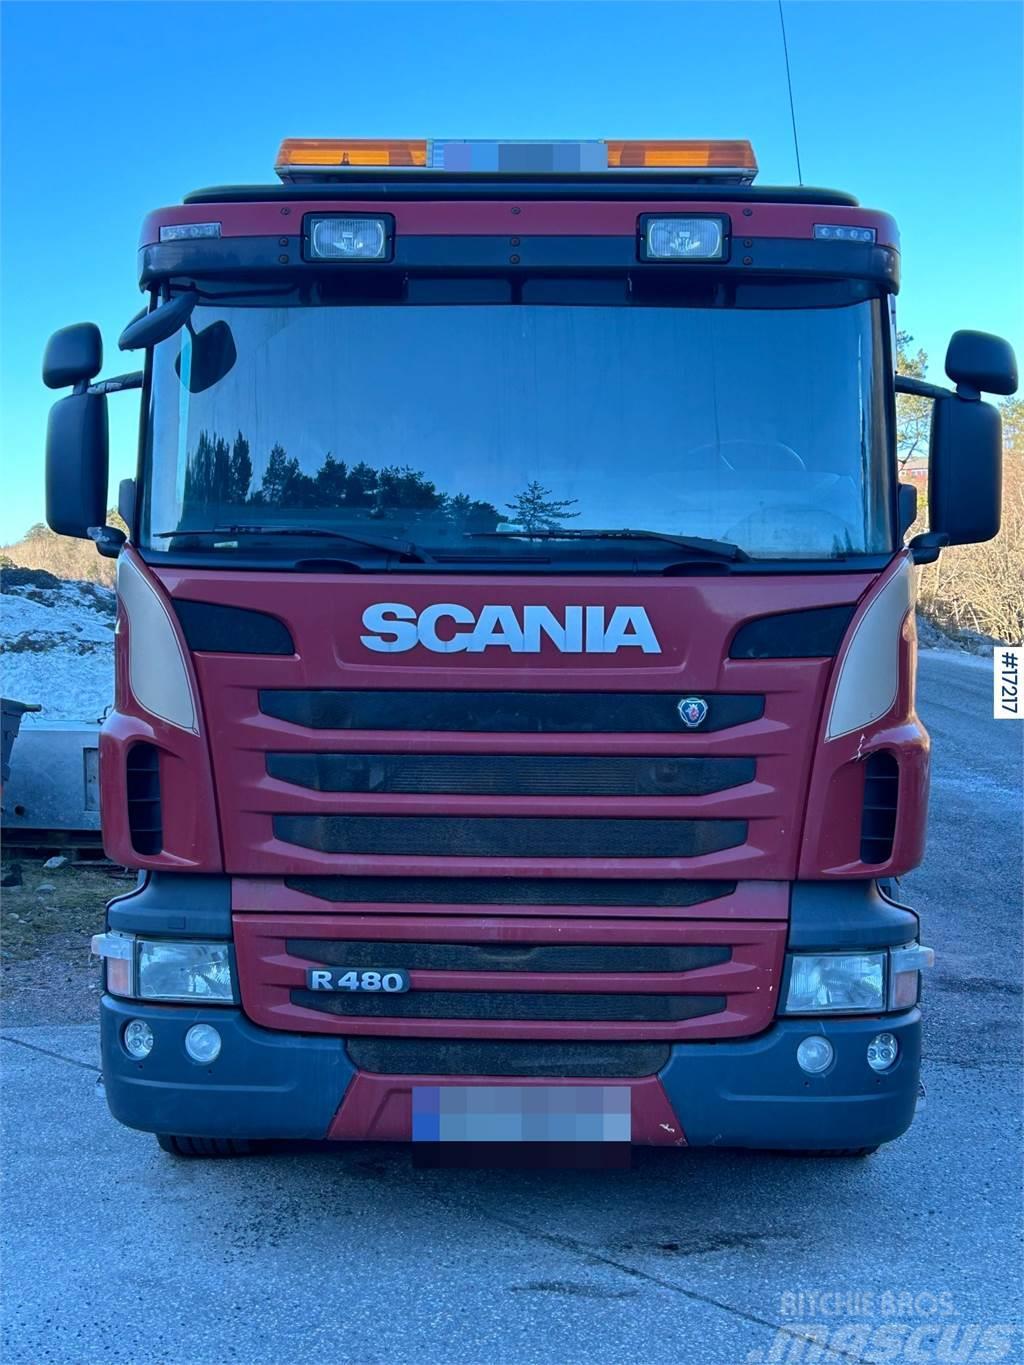 Scania R480 6x2 combi Fico suction/pump truck for sale as Tankwagen